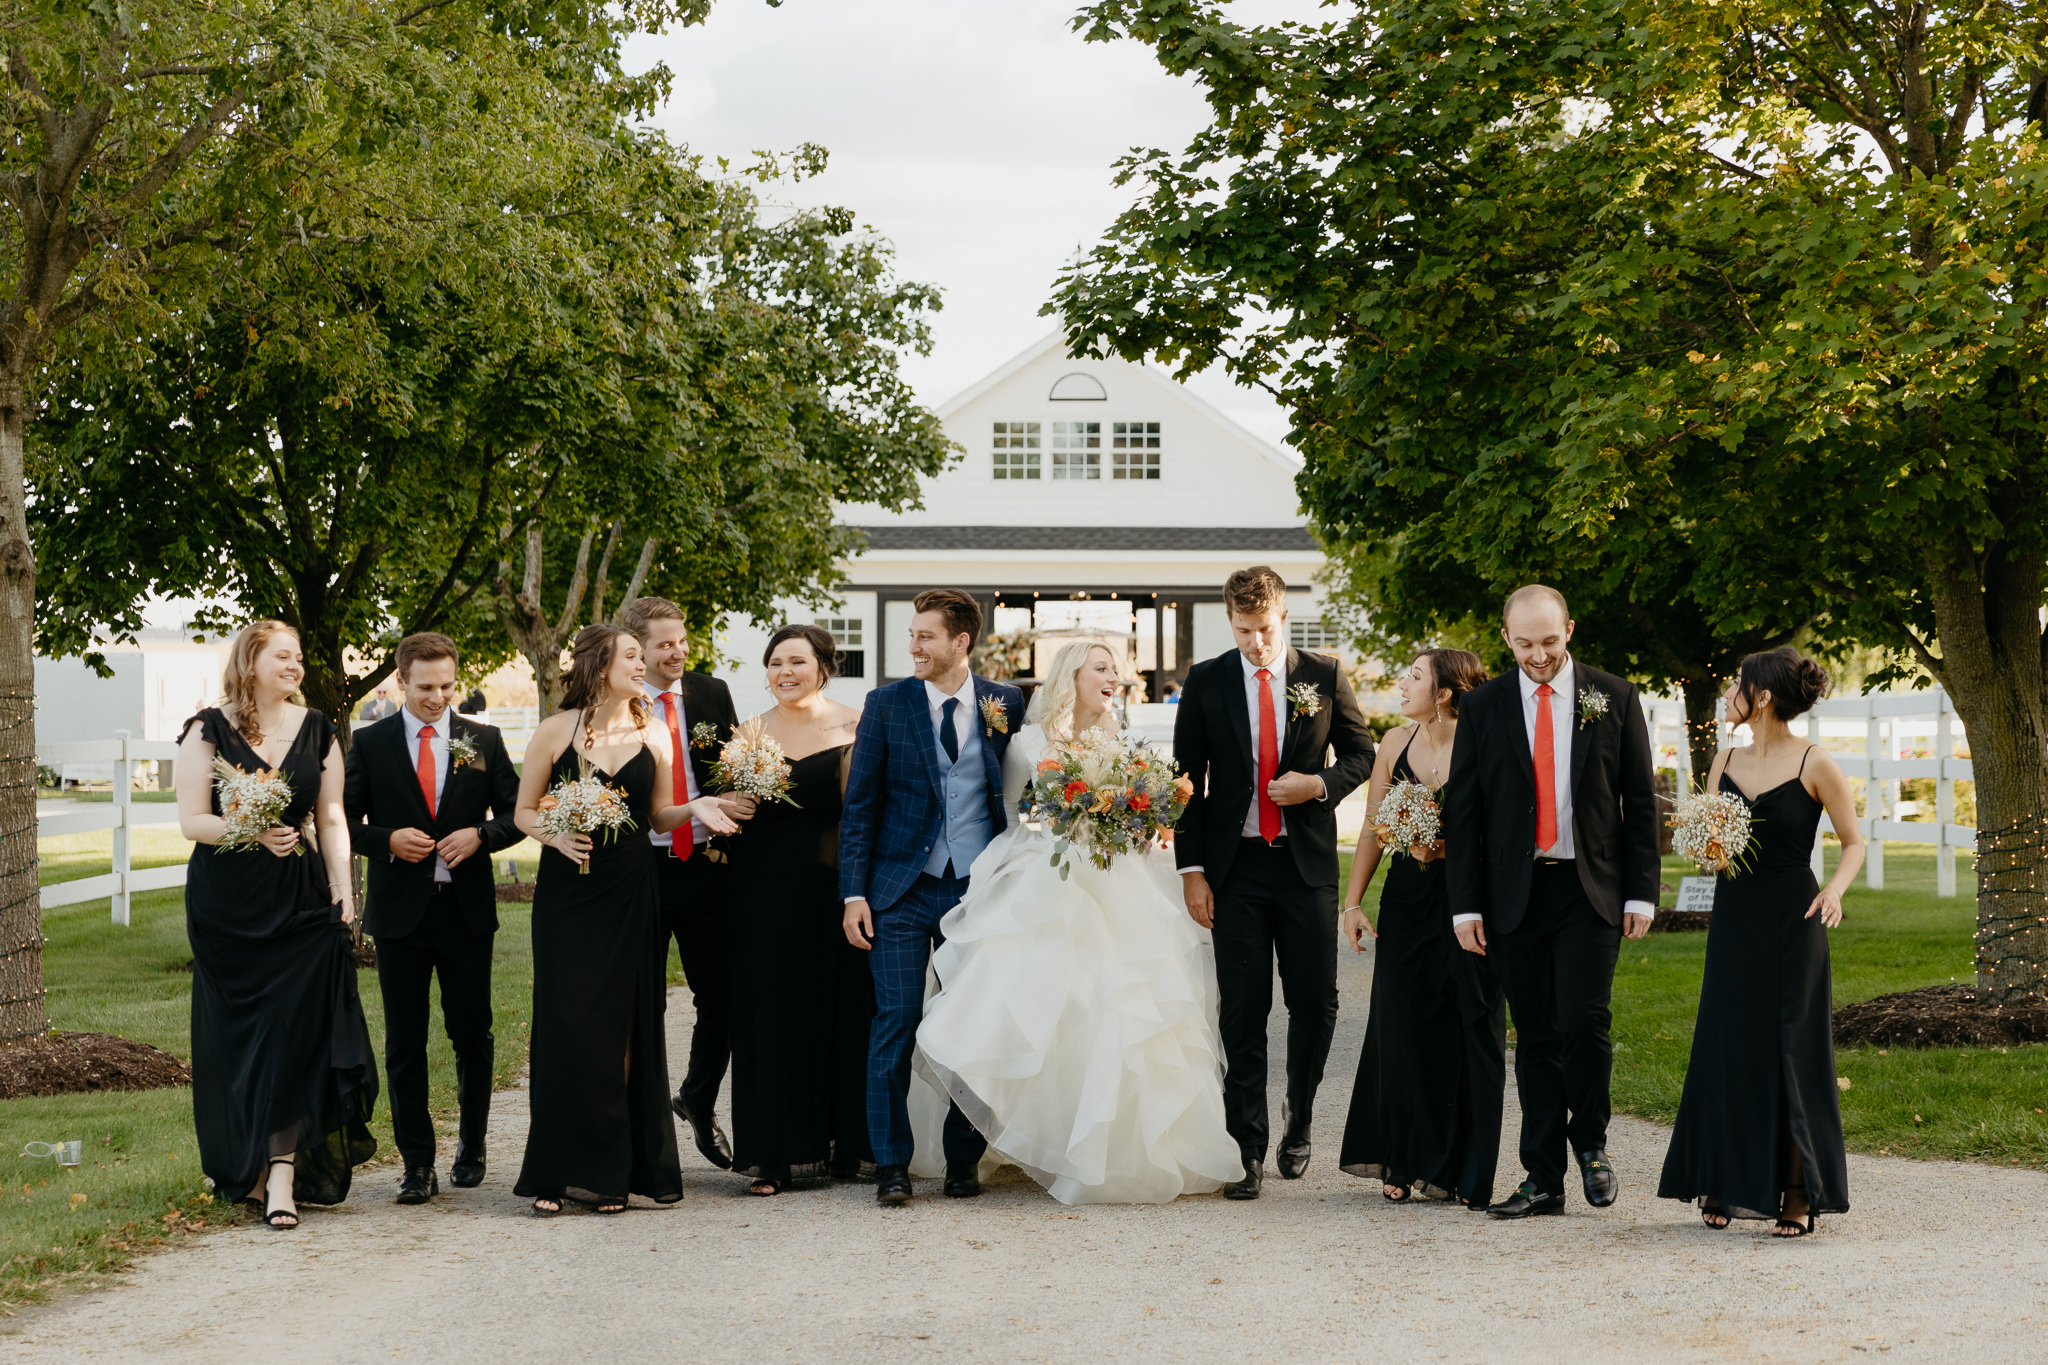 Wedding party of bridesmaids and groomsmen stand in a line and smile in front of a white horse stable and trees